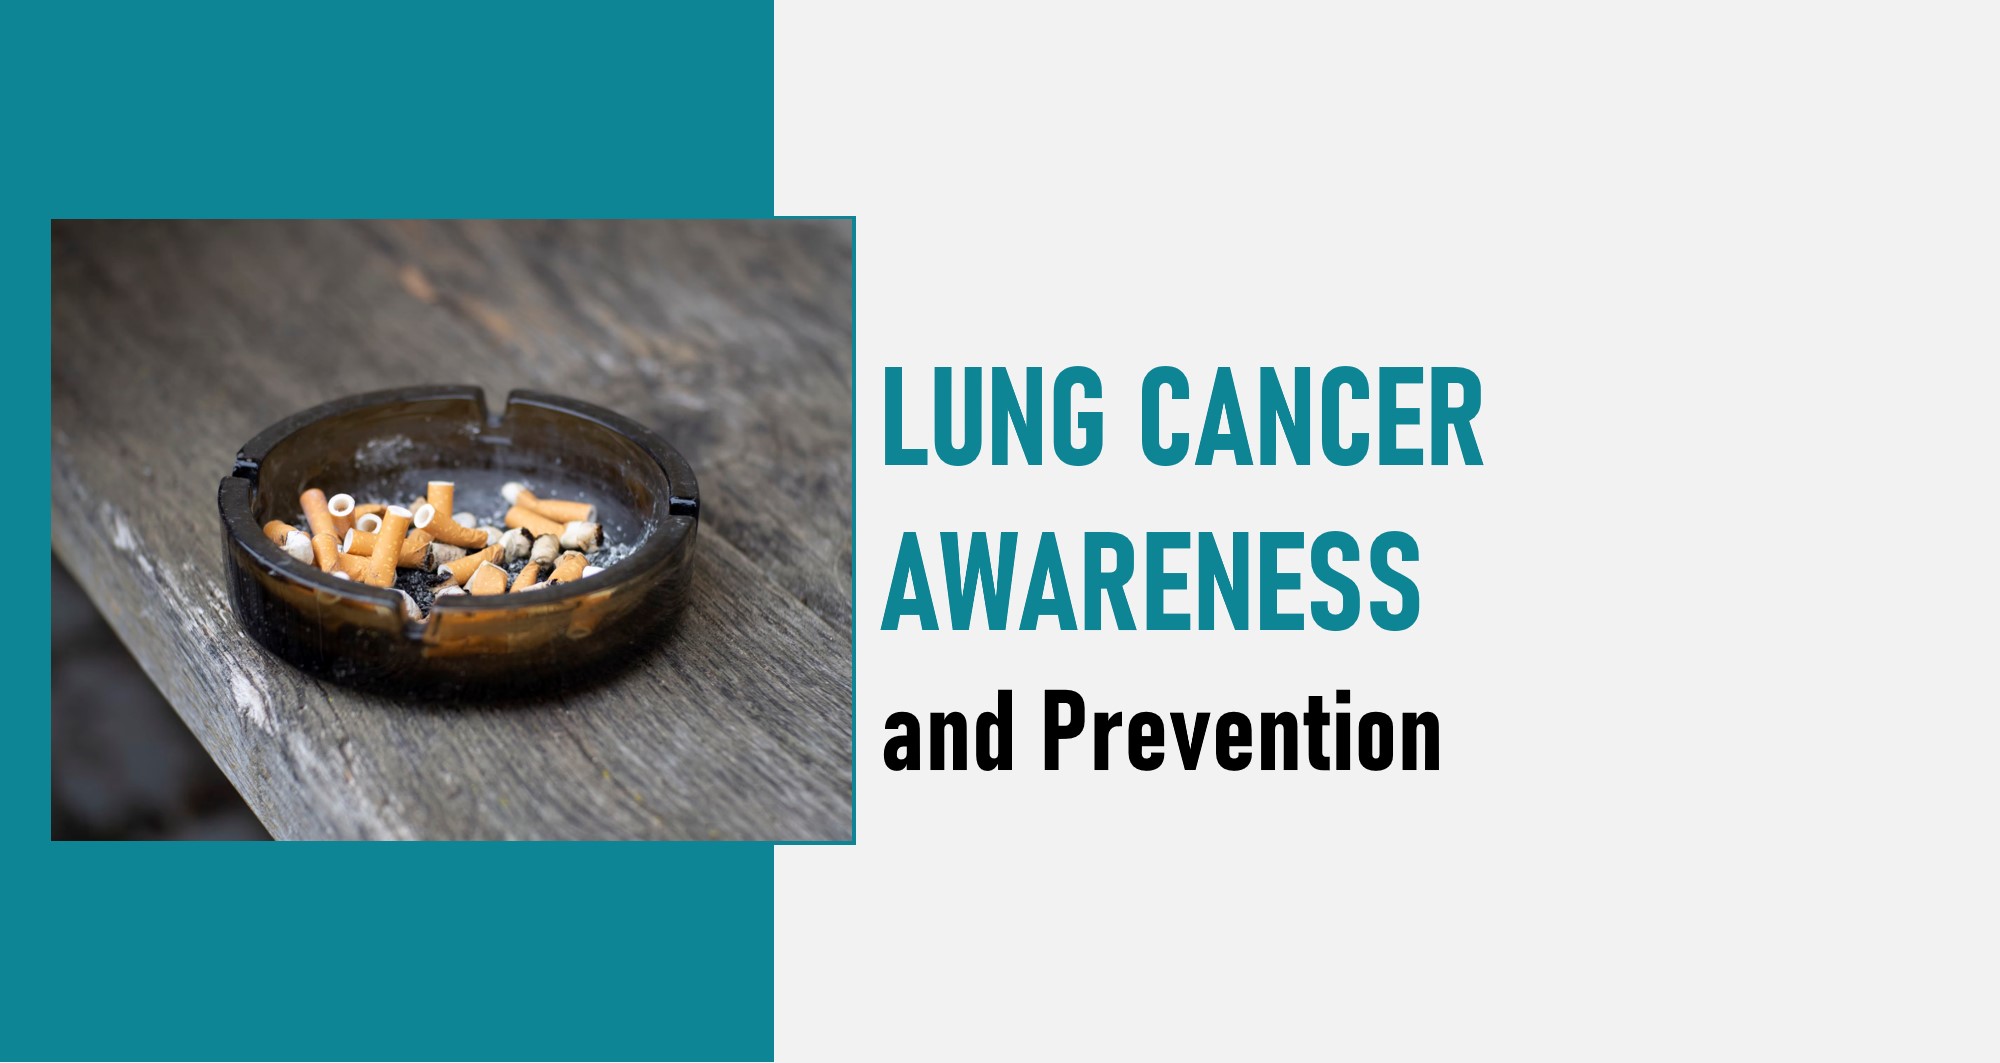 Lung Cancer Awareness and Prevention